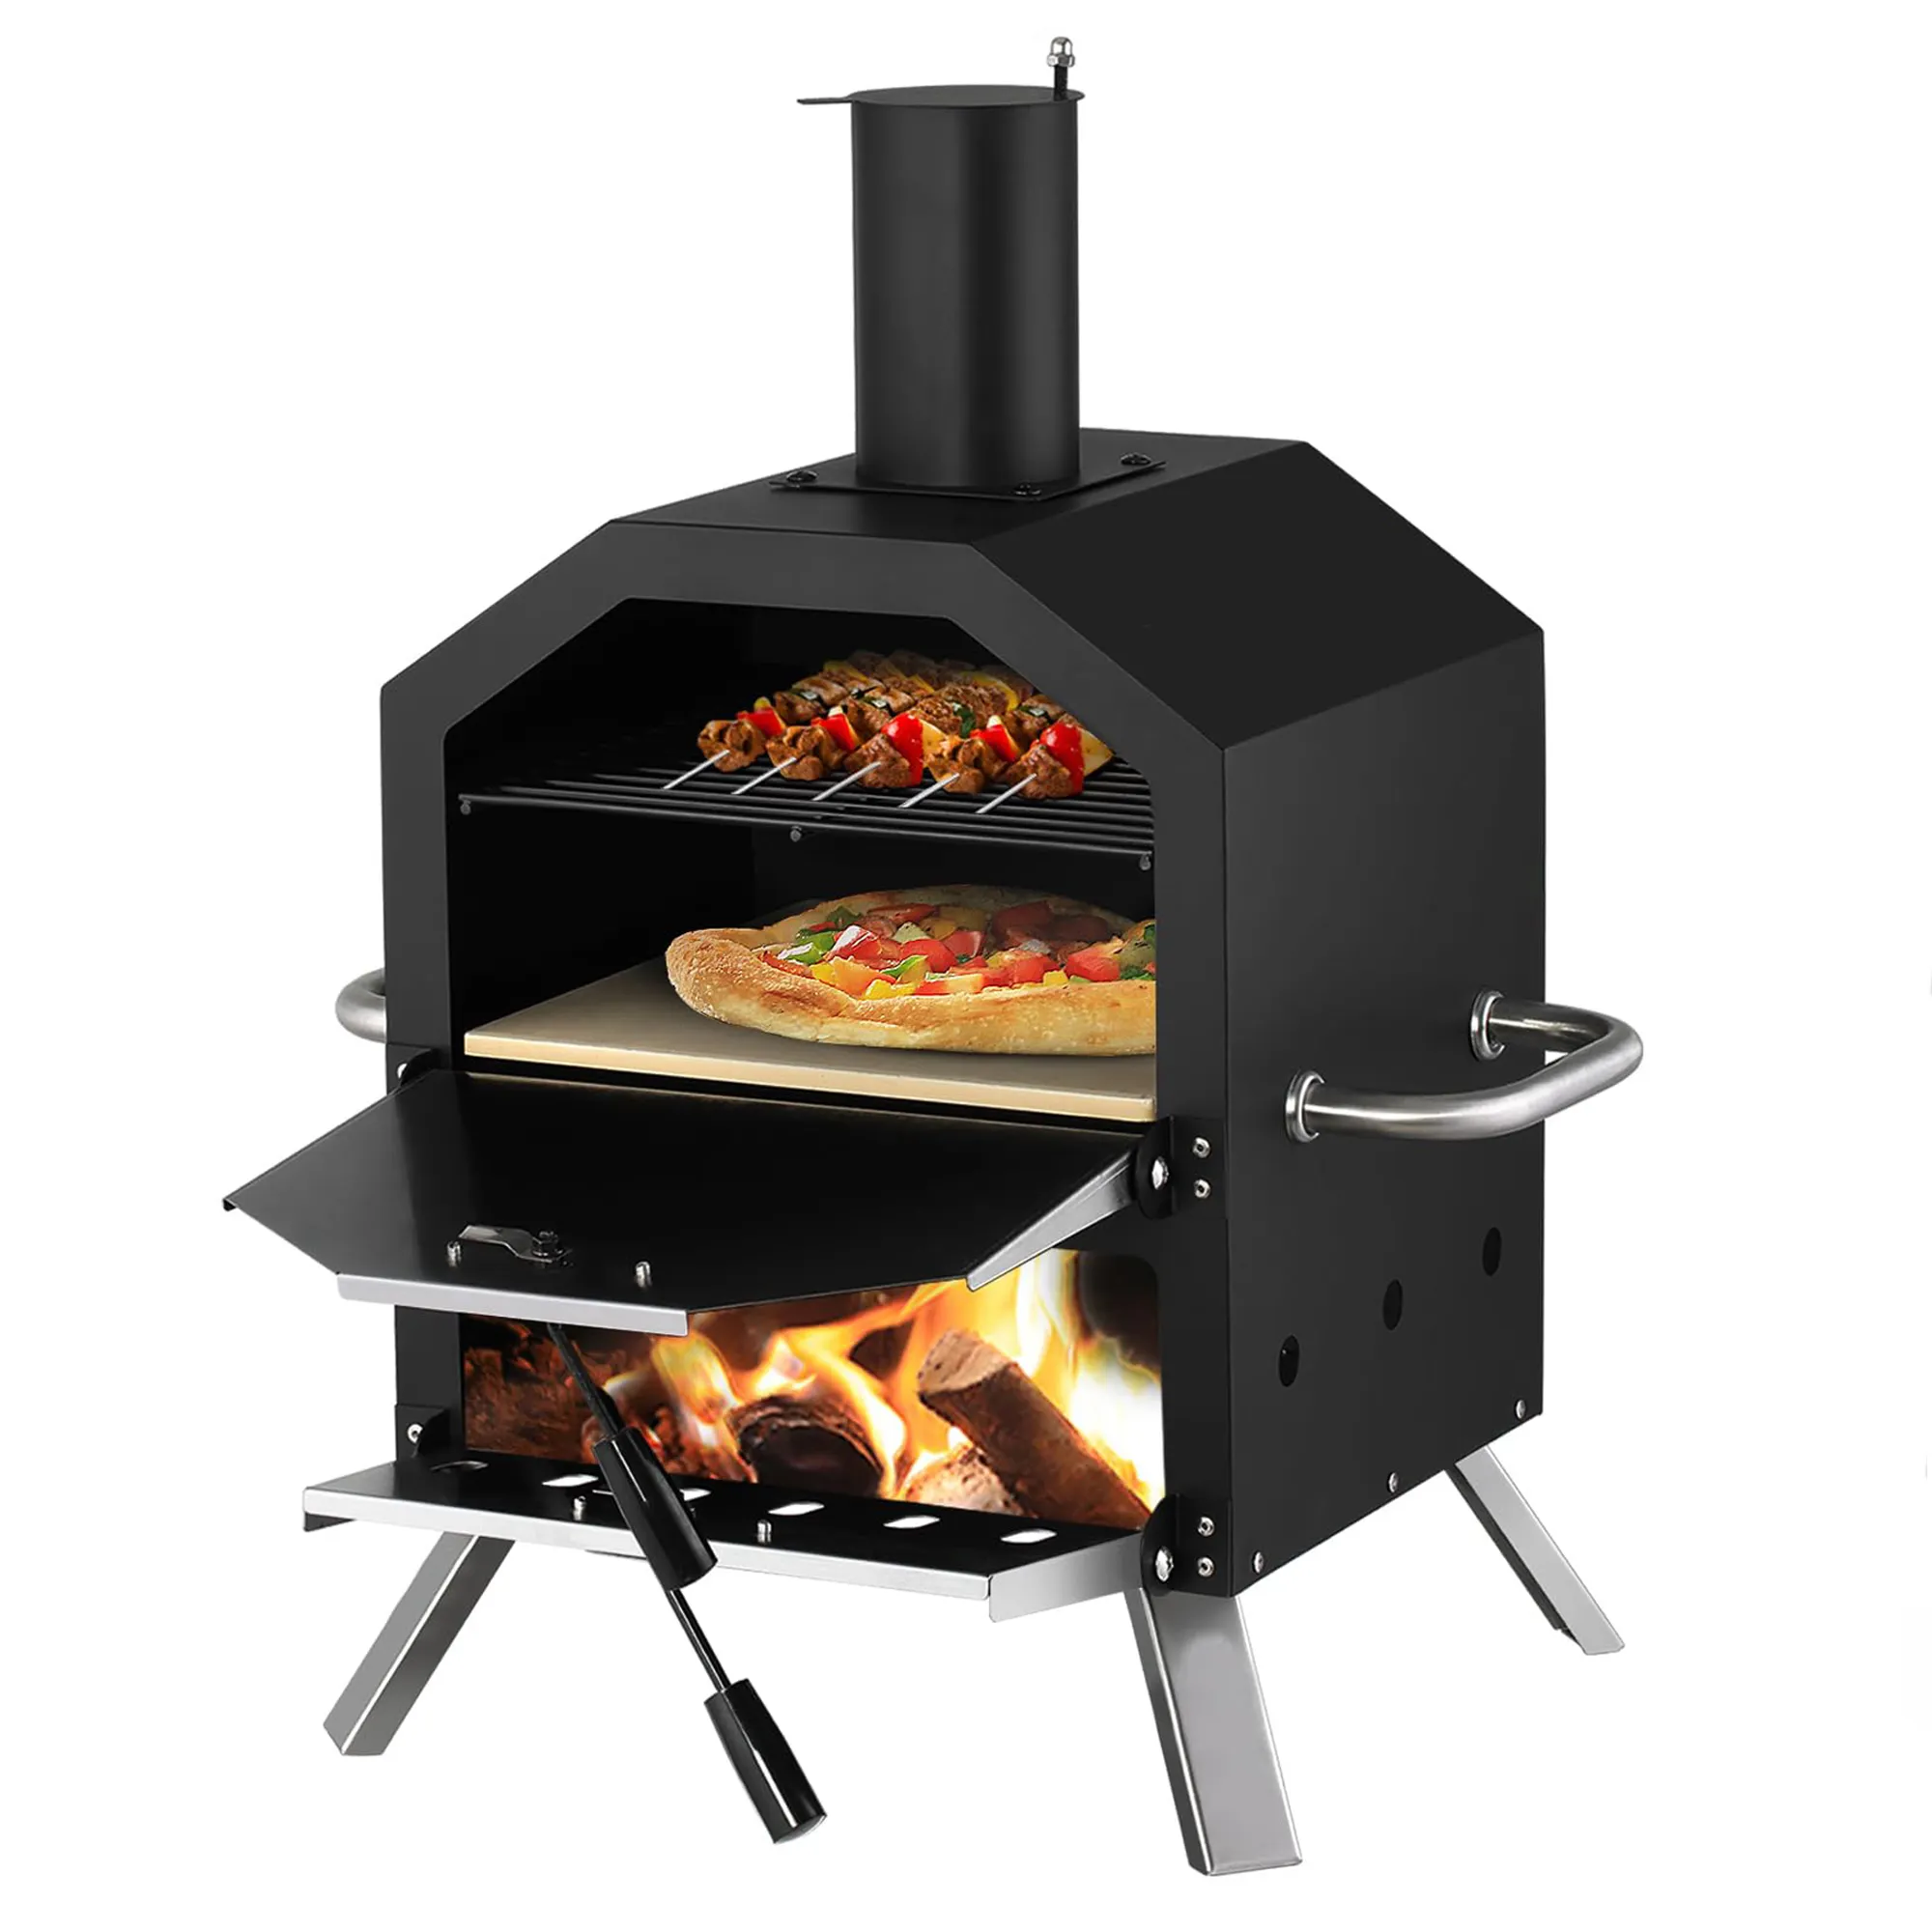 2-Layer 16" Pizza Maker Big Capacity Stainless Steel Manual Bread Pizza Oven with Peel Stone Waterproof Cover